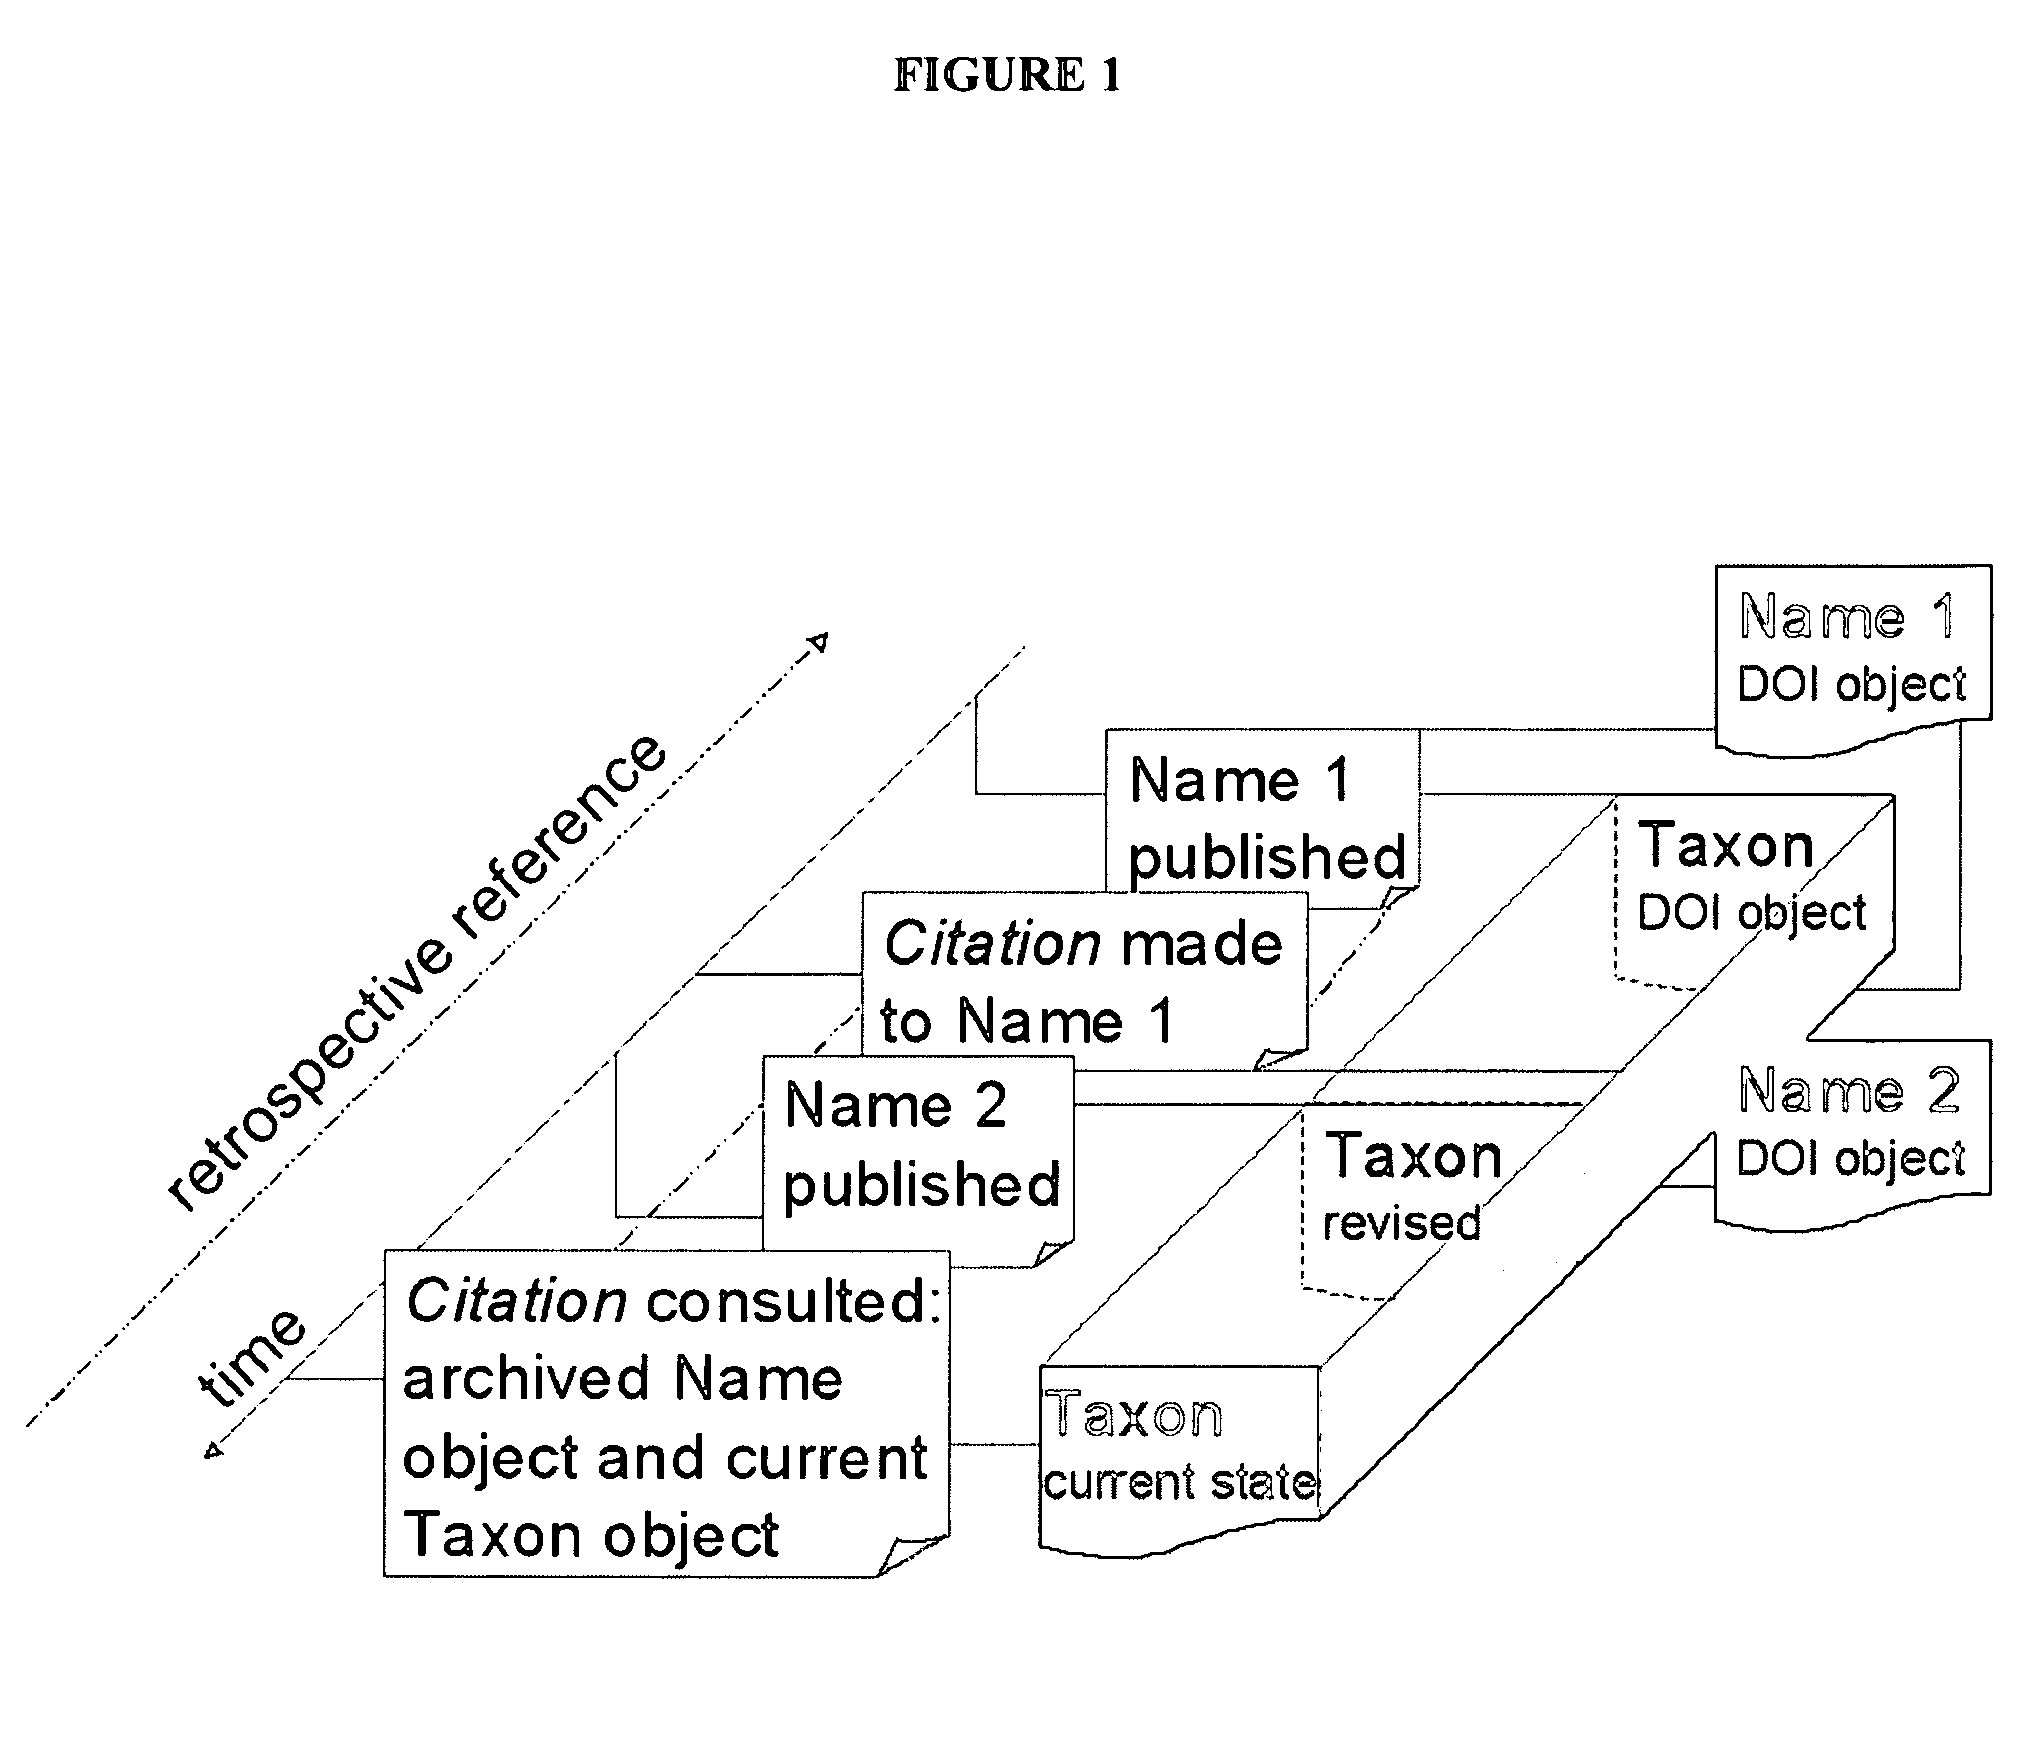 Systems and methods for resolving ambiguity between names and entities